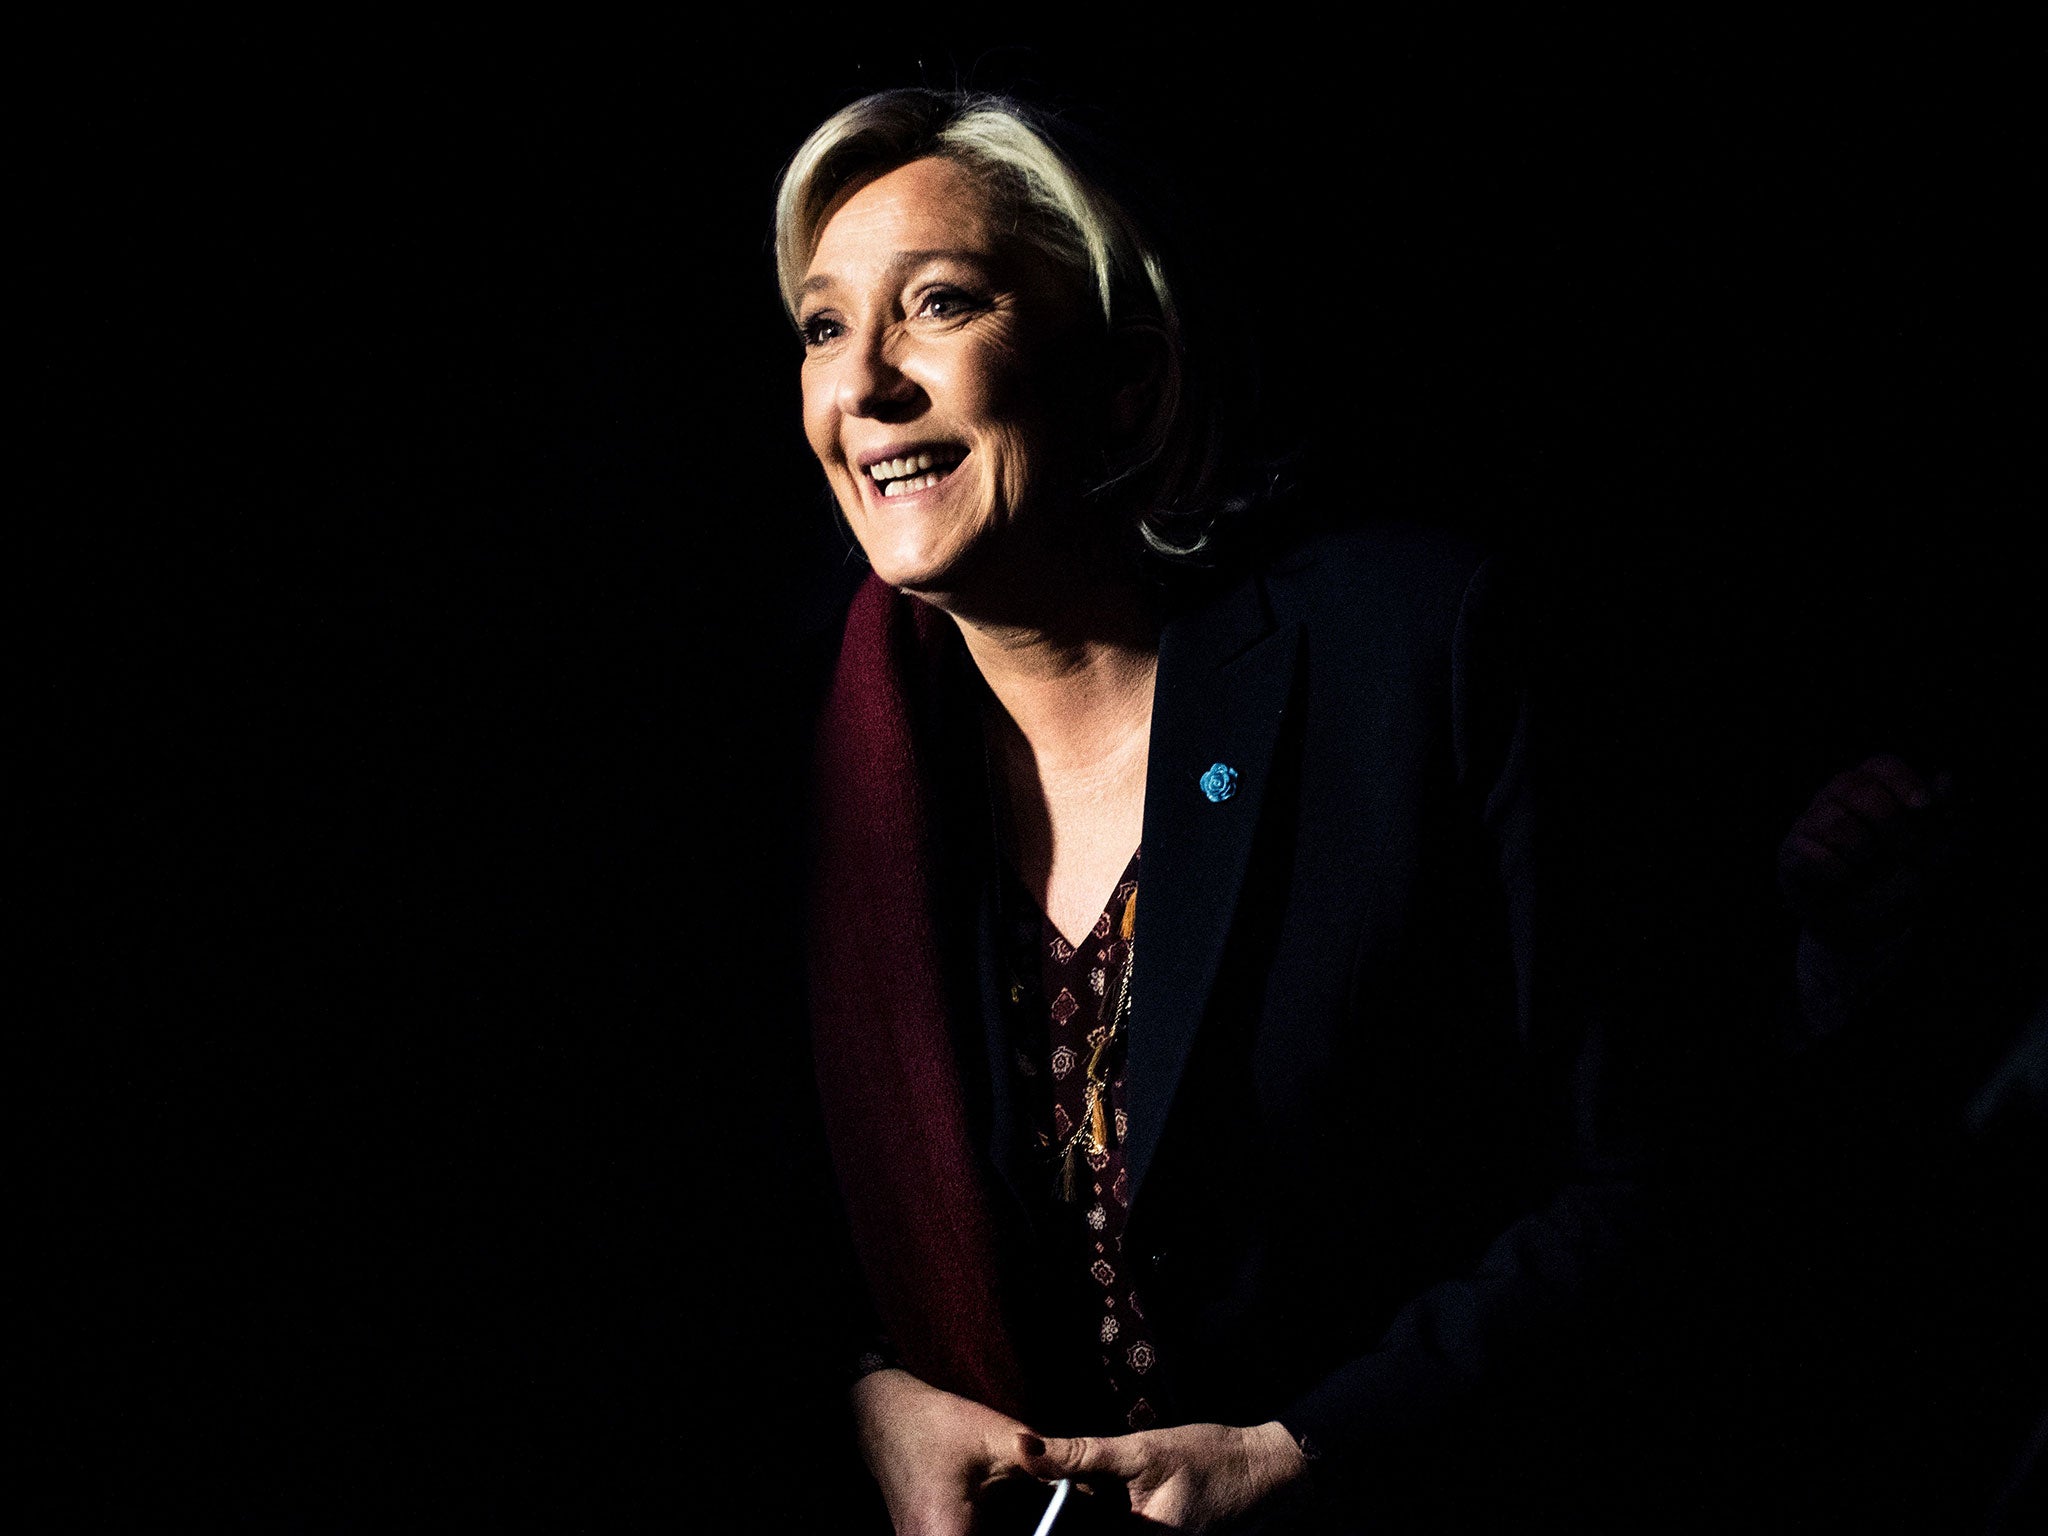 French presidential election candidate Marine Le Pen attends a two-day political rally to kick off her presidential campaign in Lyon on 4 February